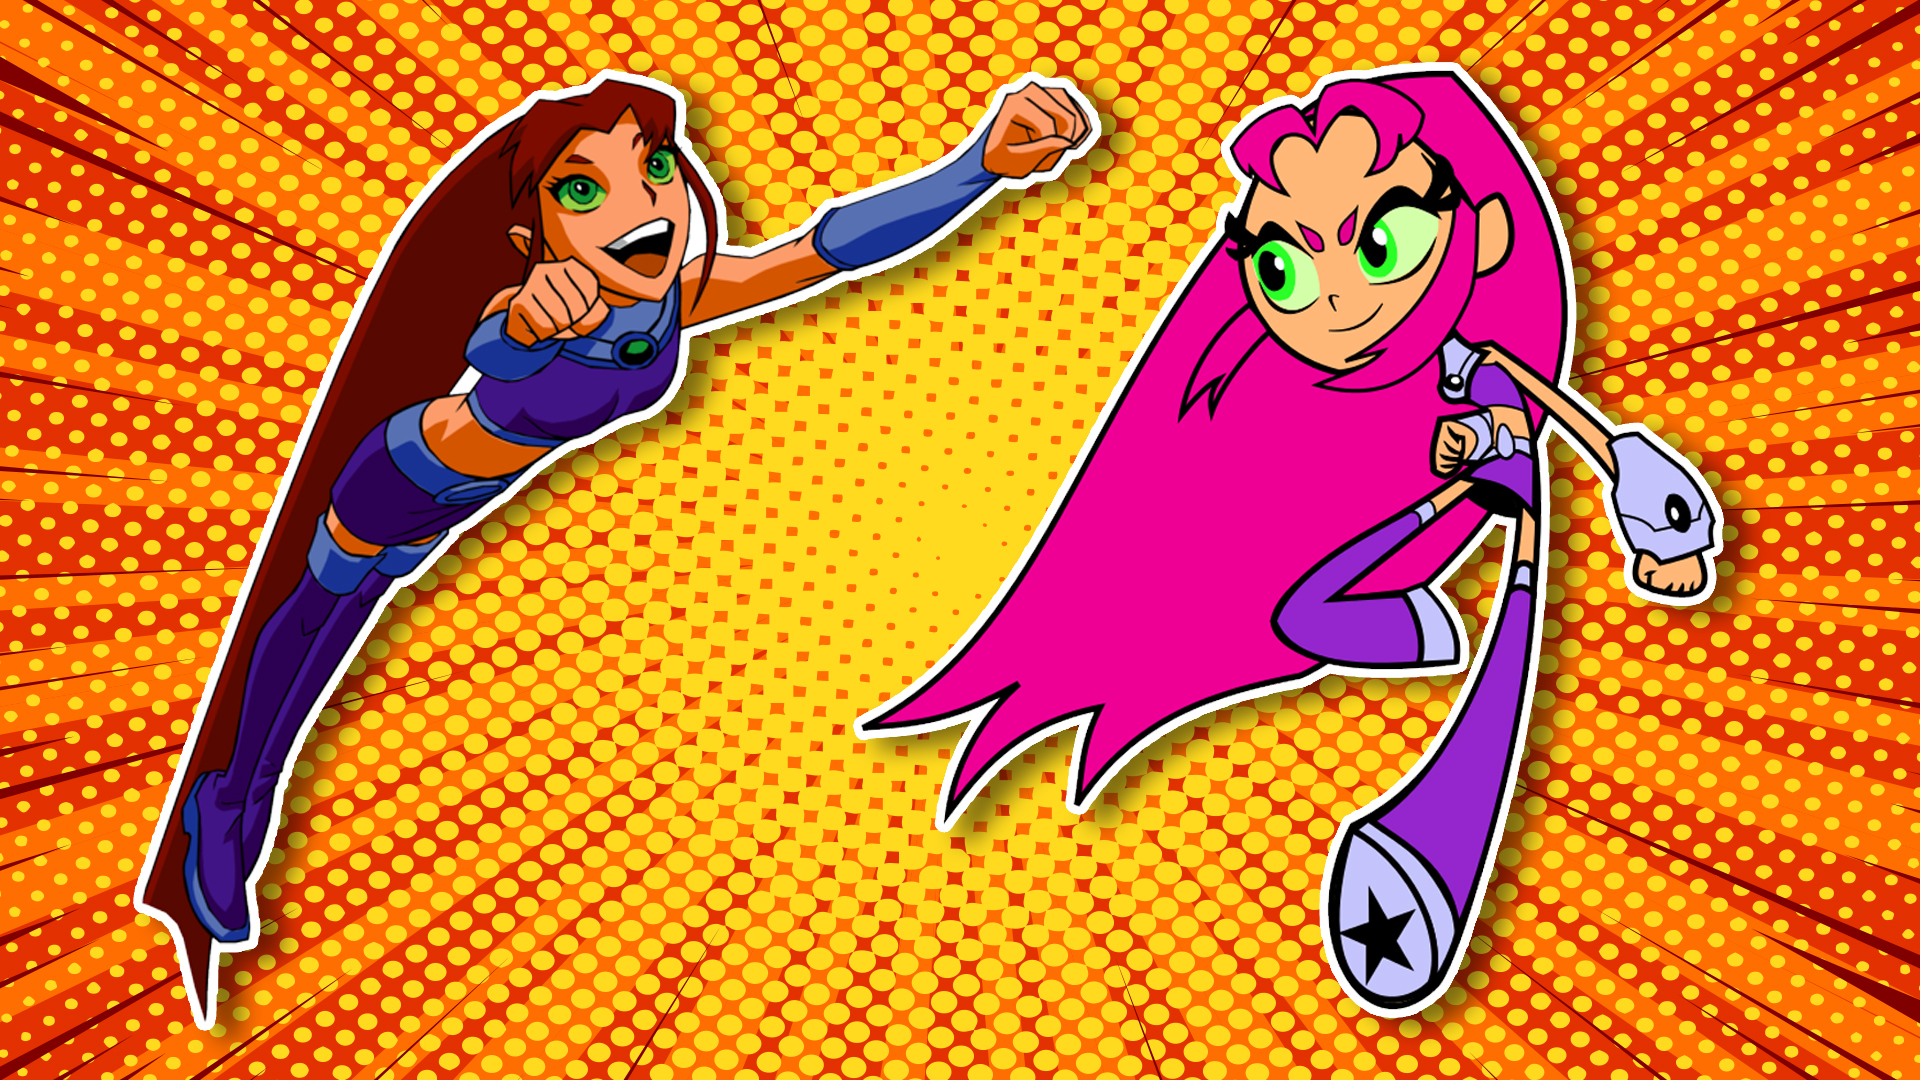 Starfire in Teen Titans and Teen Titans Go!